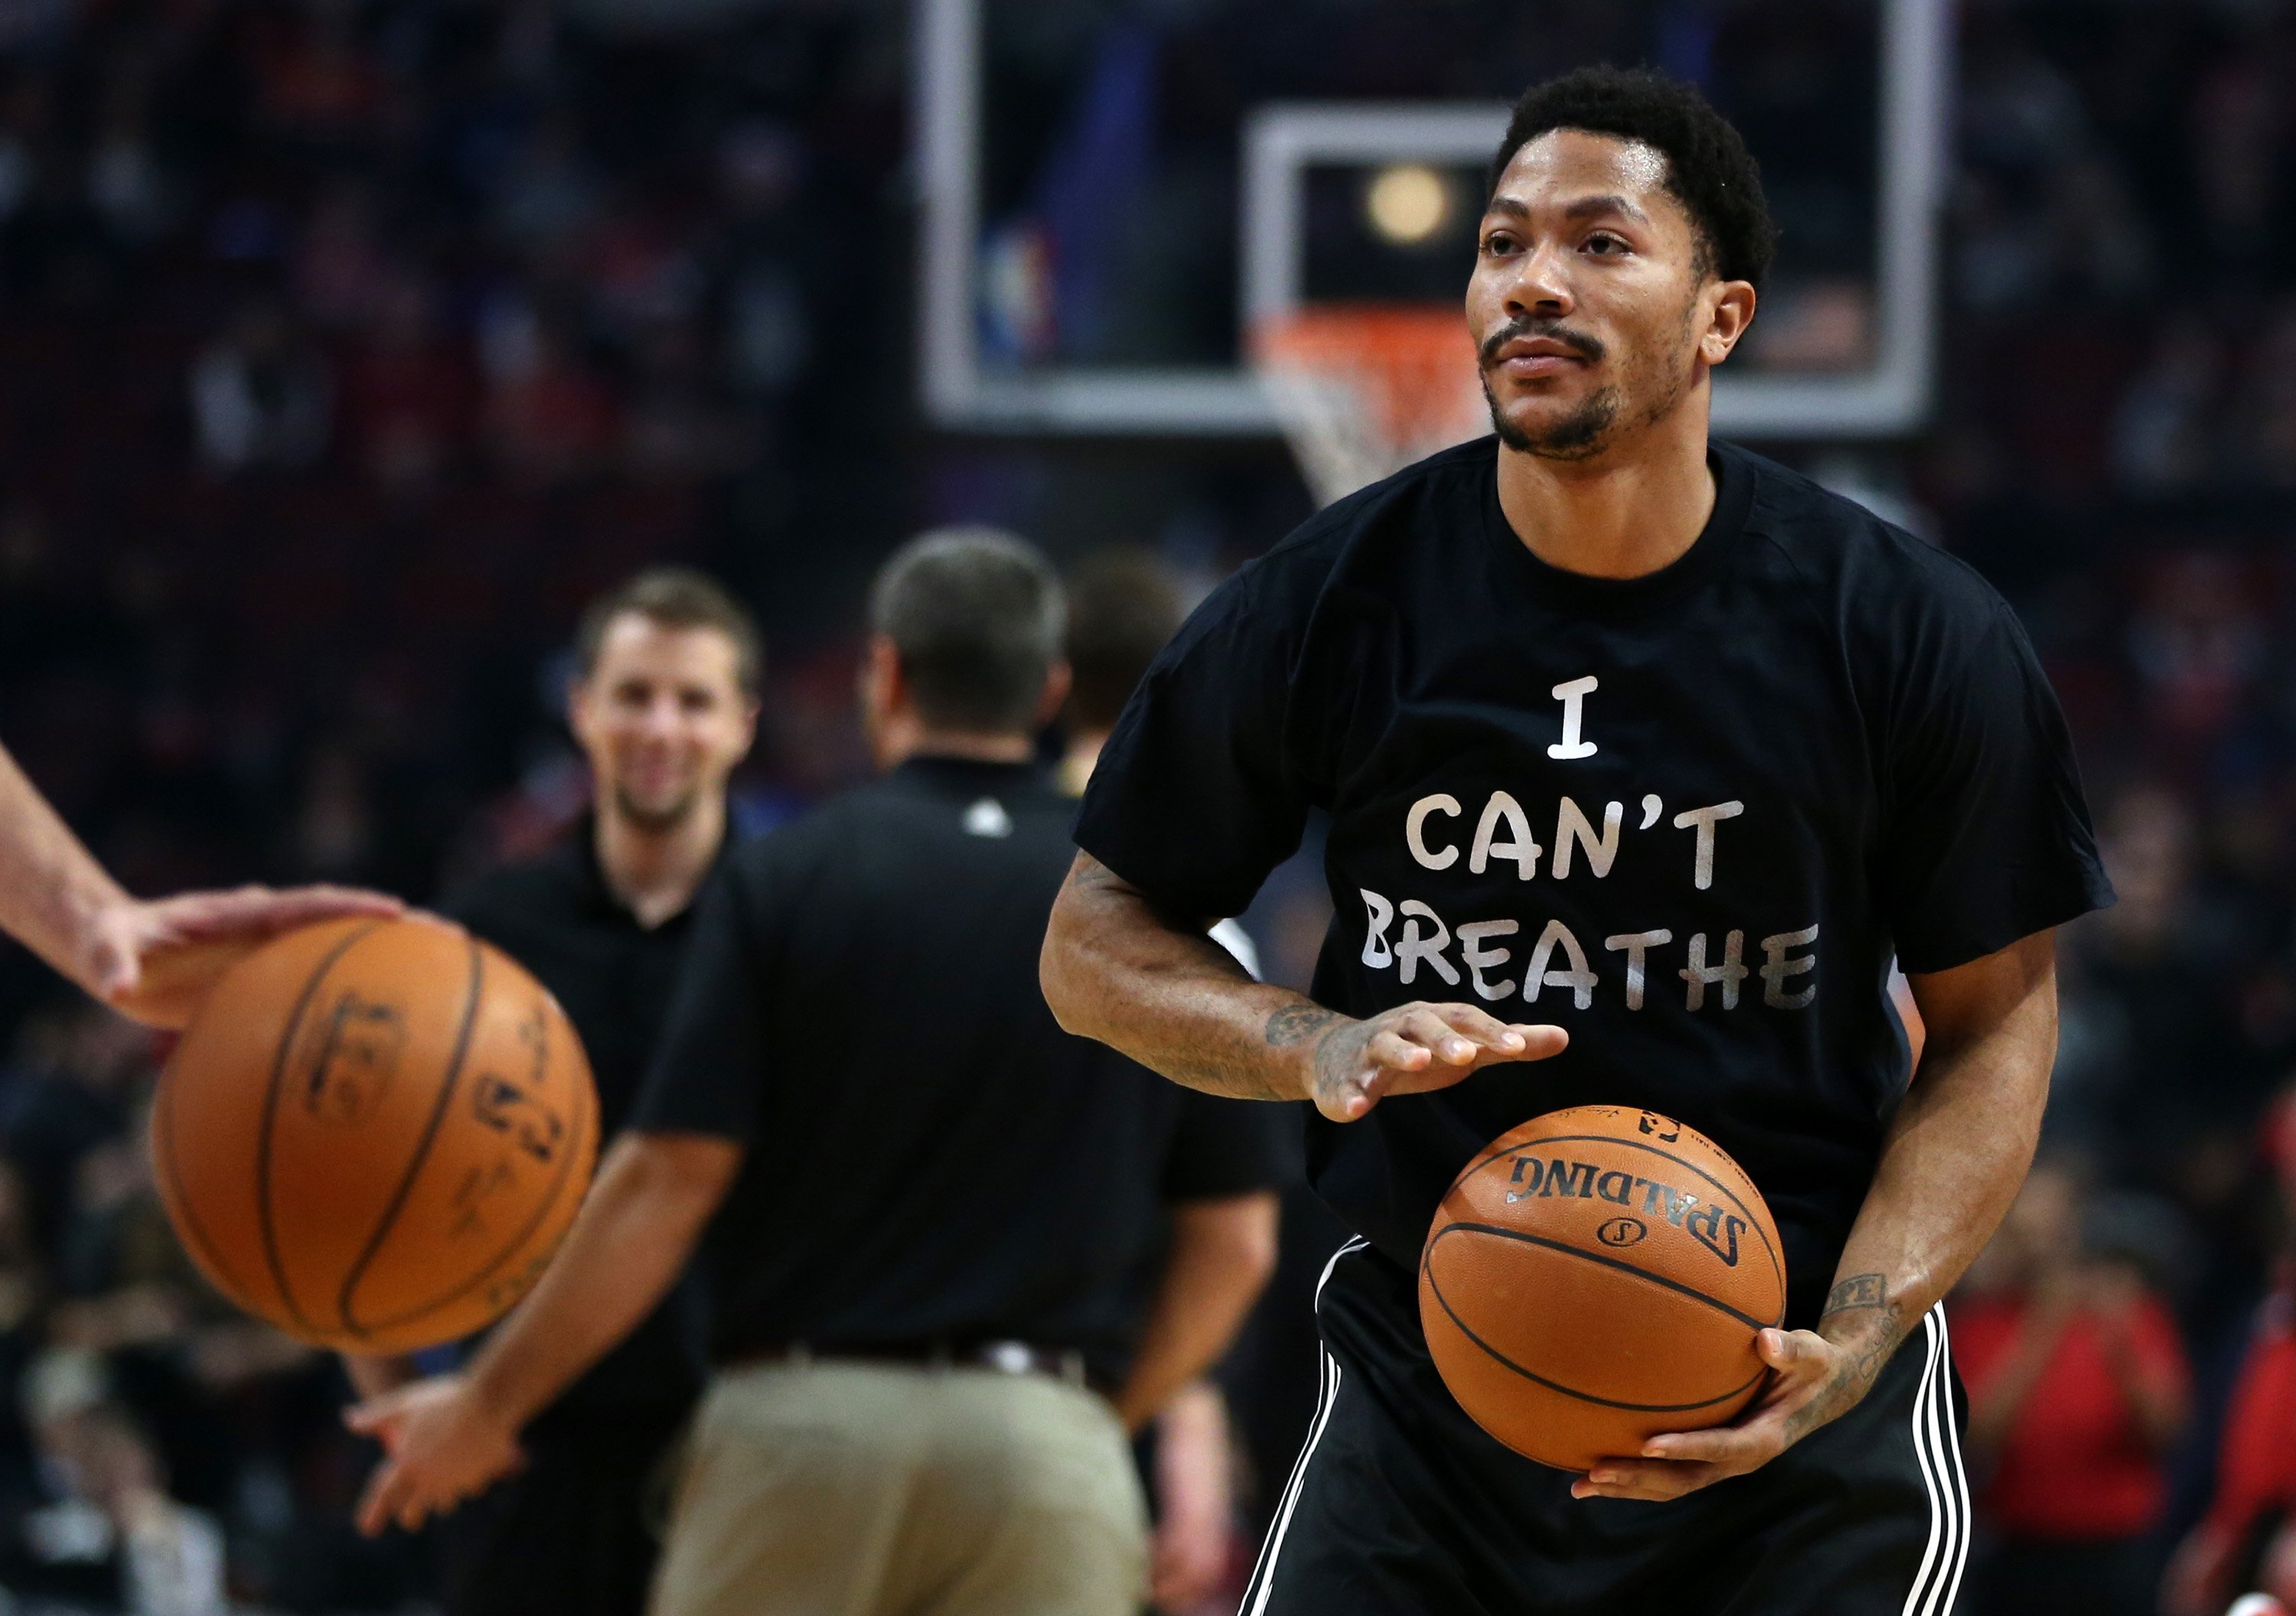 Chicago Bulls guard Derrick Rose wears a shirt reading "I Can't Breath" while warming up for a game against the Golden State Warriors on Dec. 6, 2014 at the United Center in Chicago.